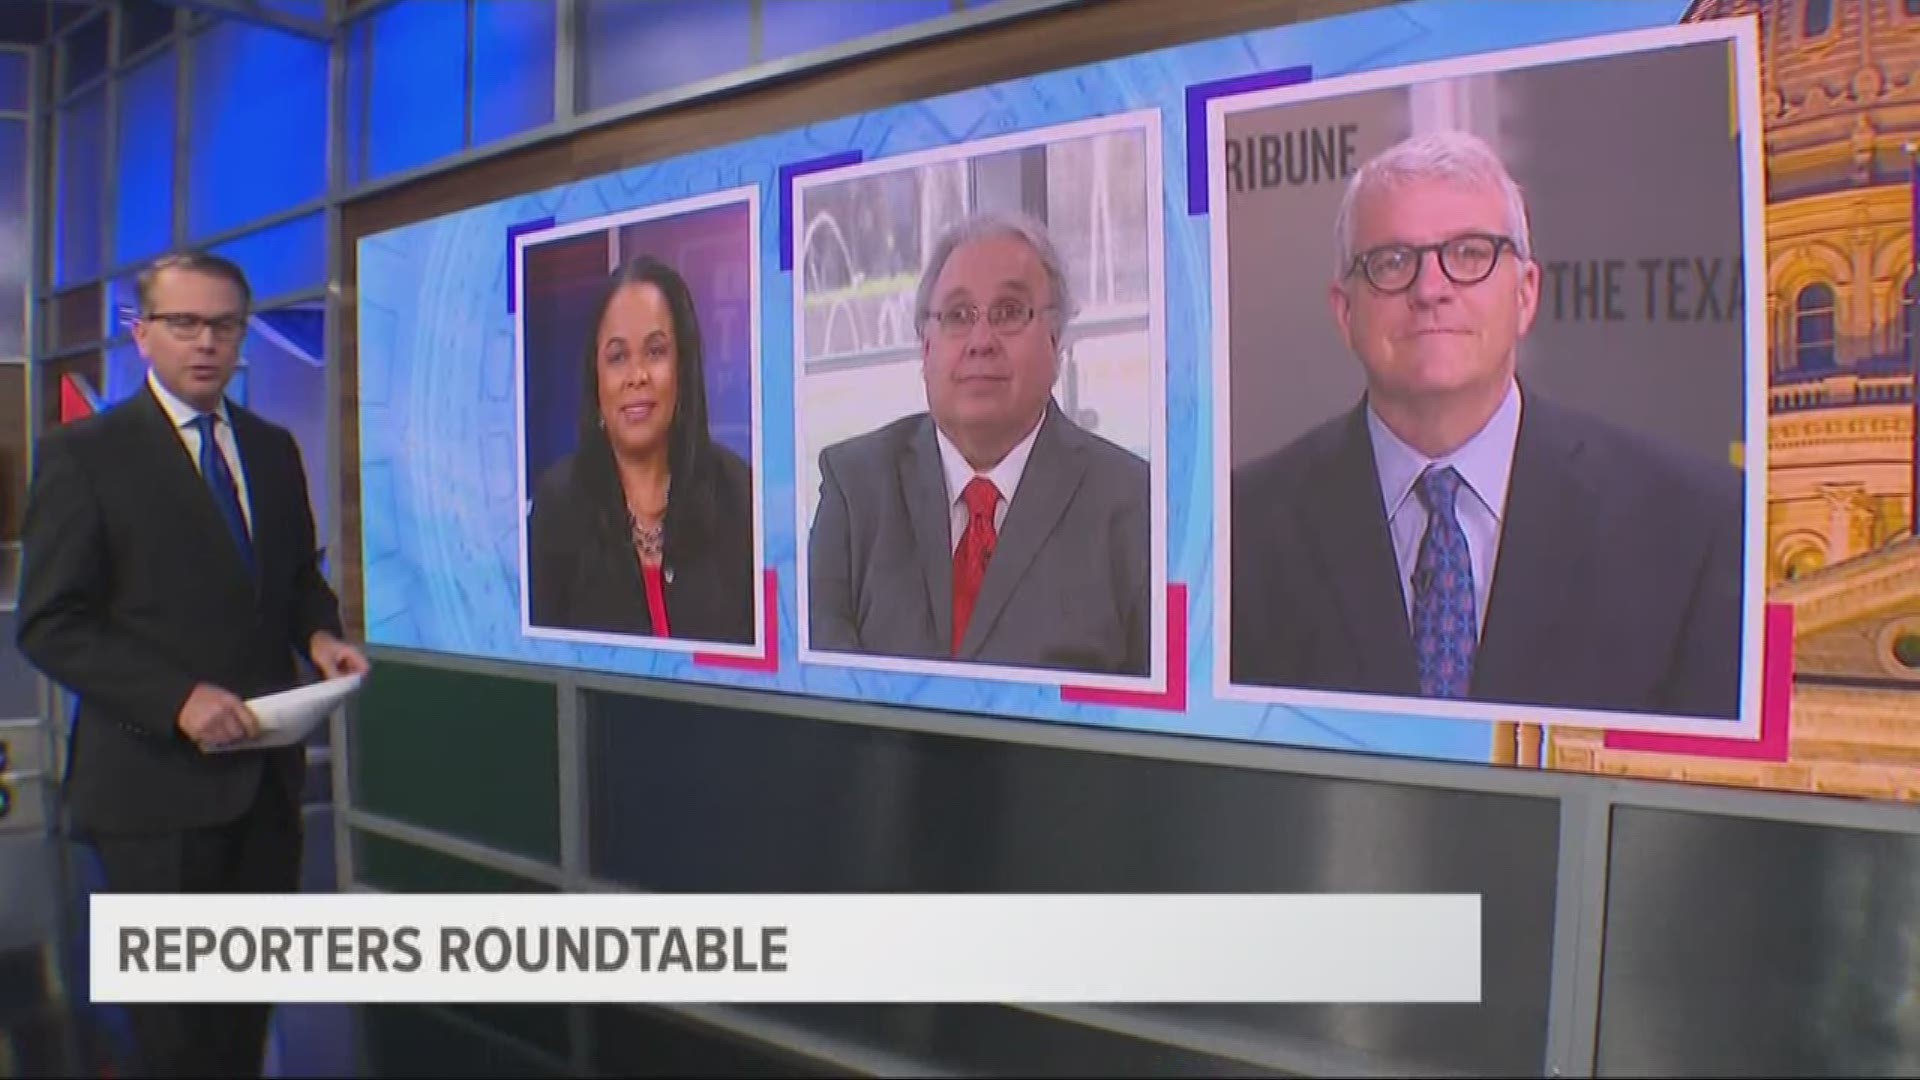 Reporters Roundtable puts the headlines in perspective each week. Ross Ramsey and Bud Kennedy returned along with Berna Dean Steptoe, WFAA’s political producer.